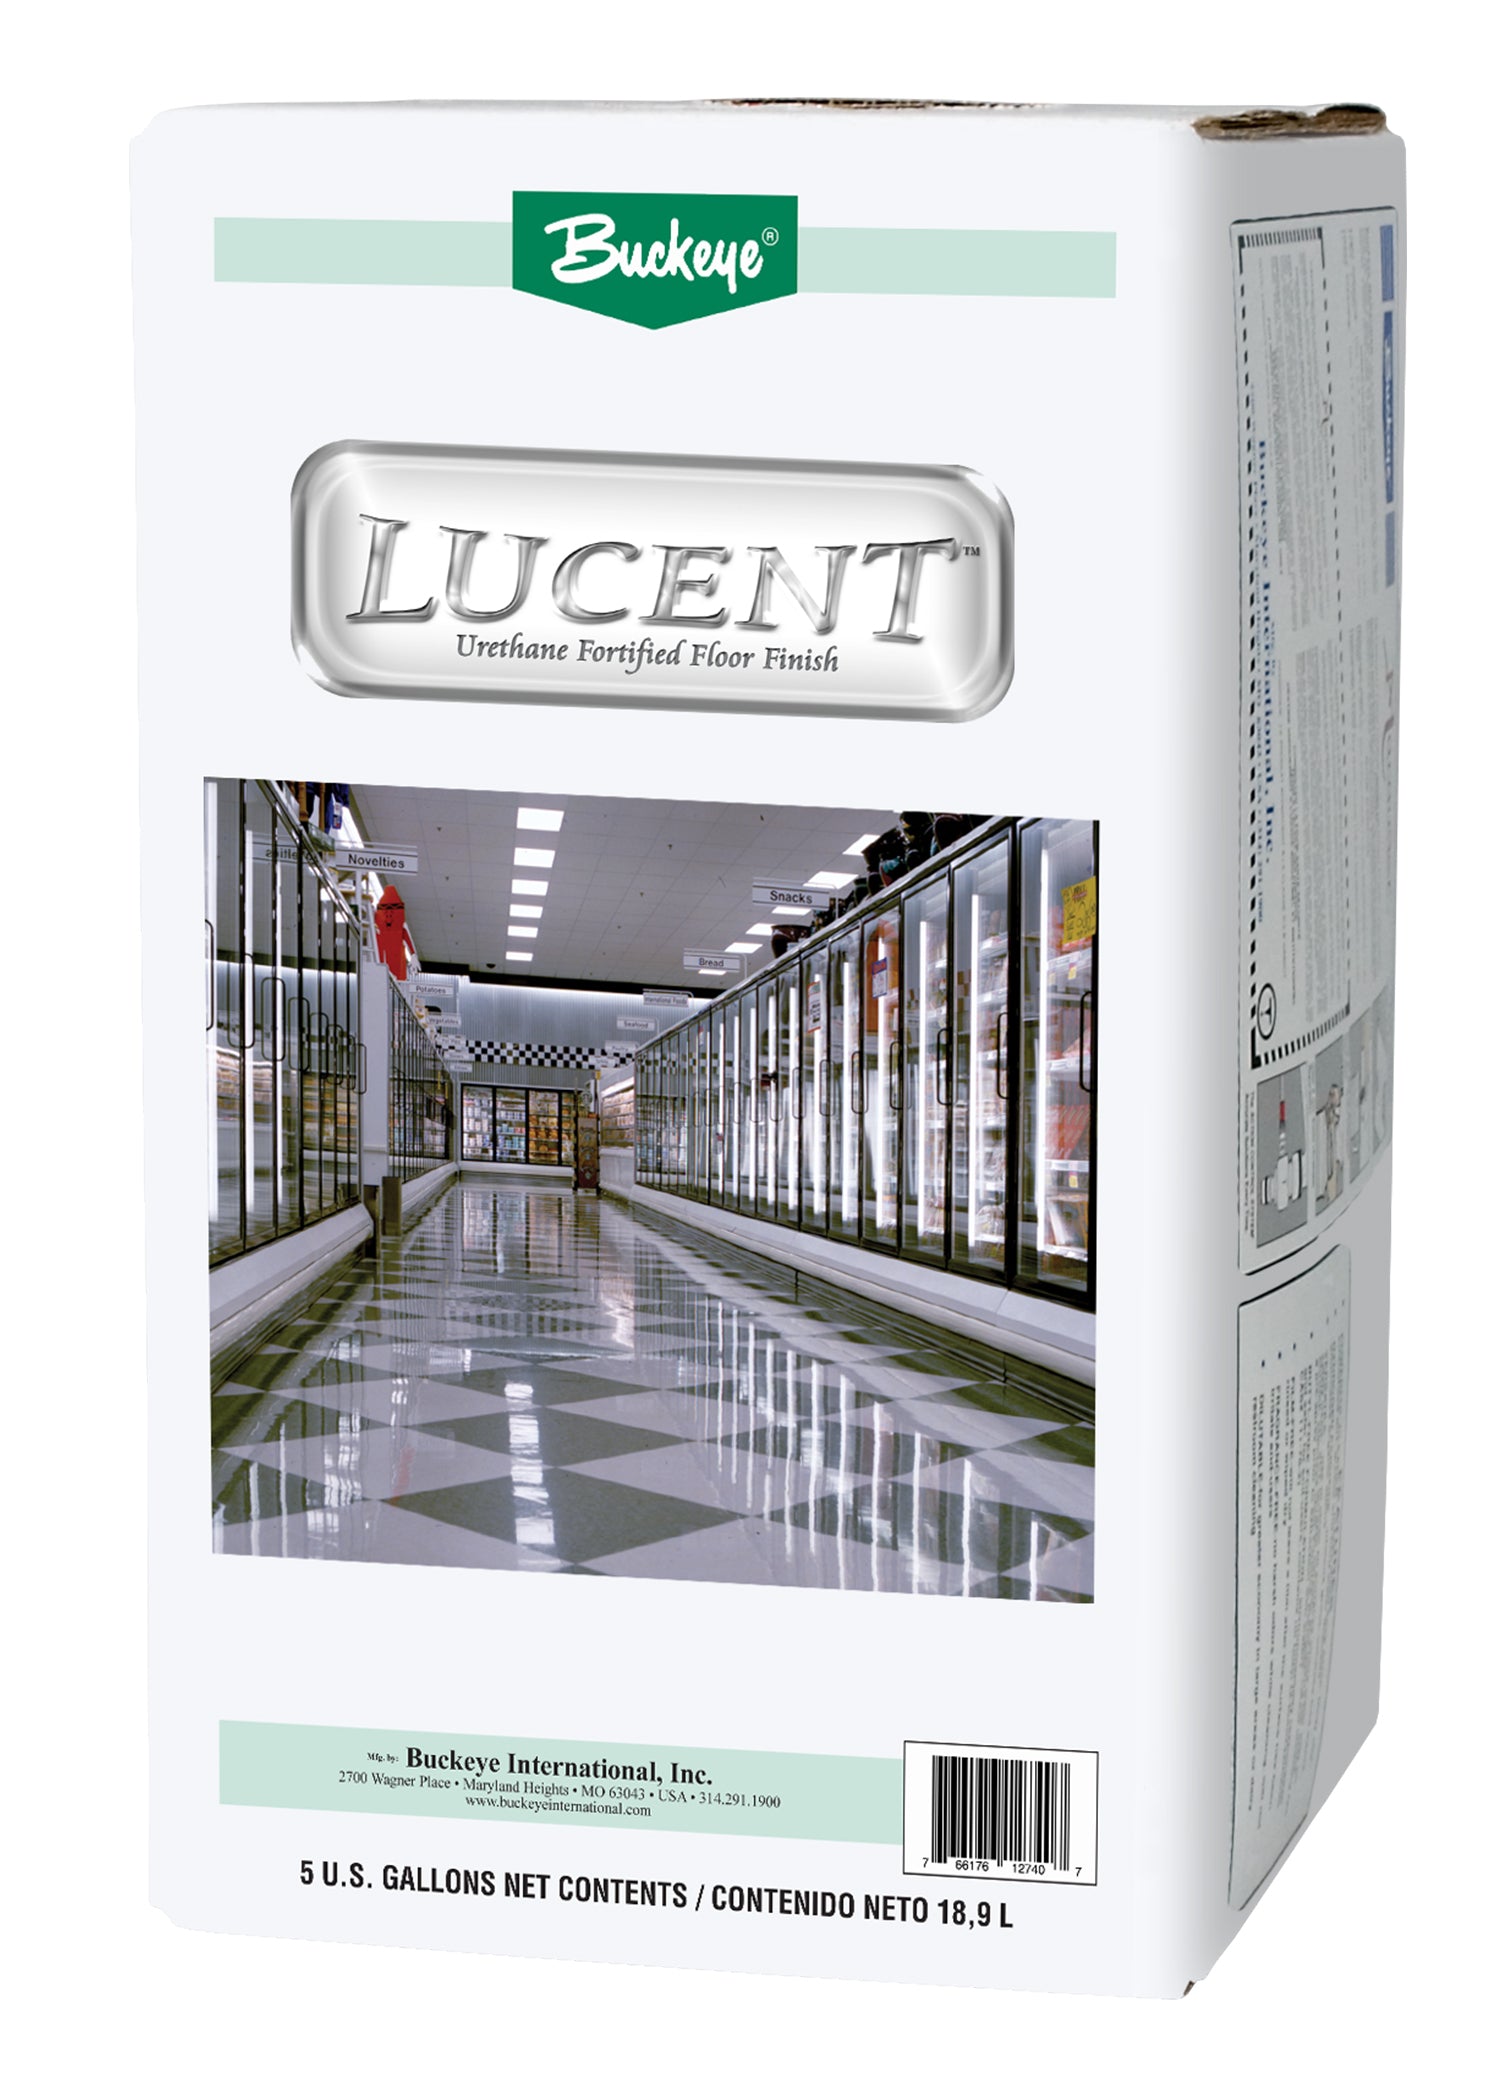 lucent  urethane fortified floor finish